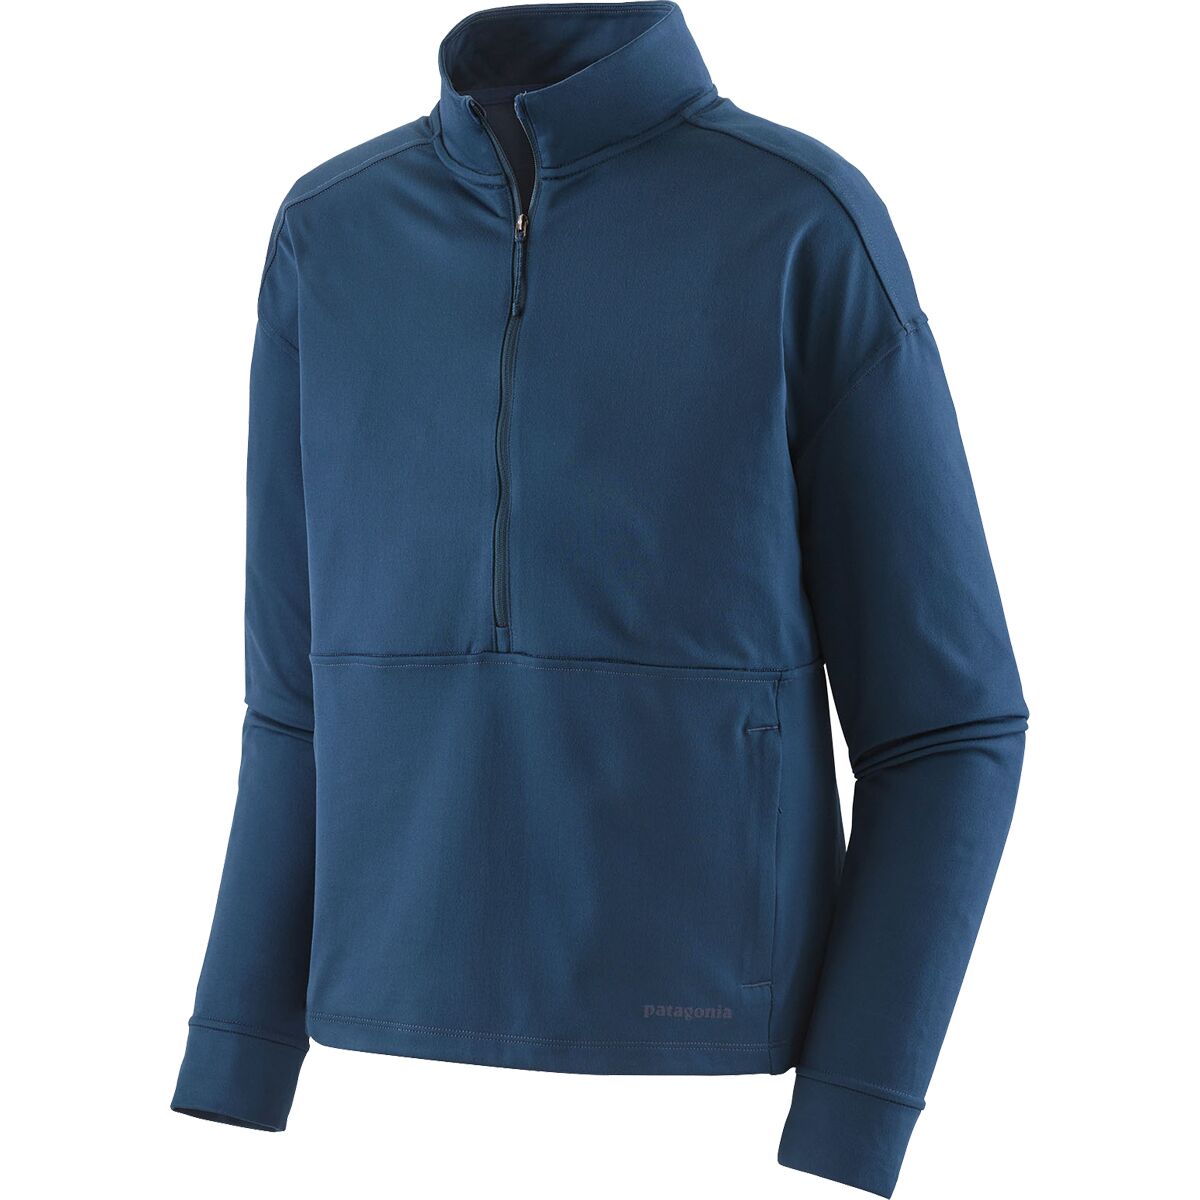 Patagonia All Trails Pullover - Women's